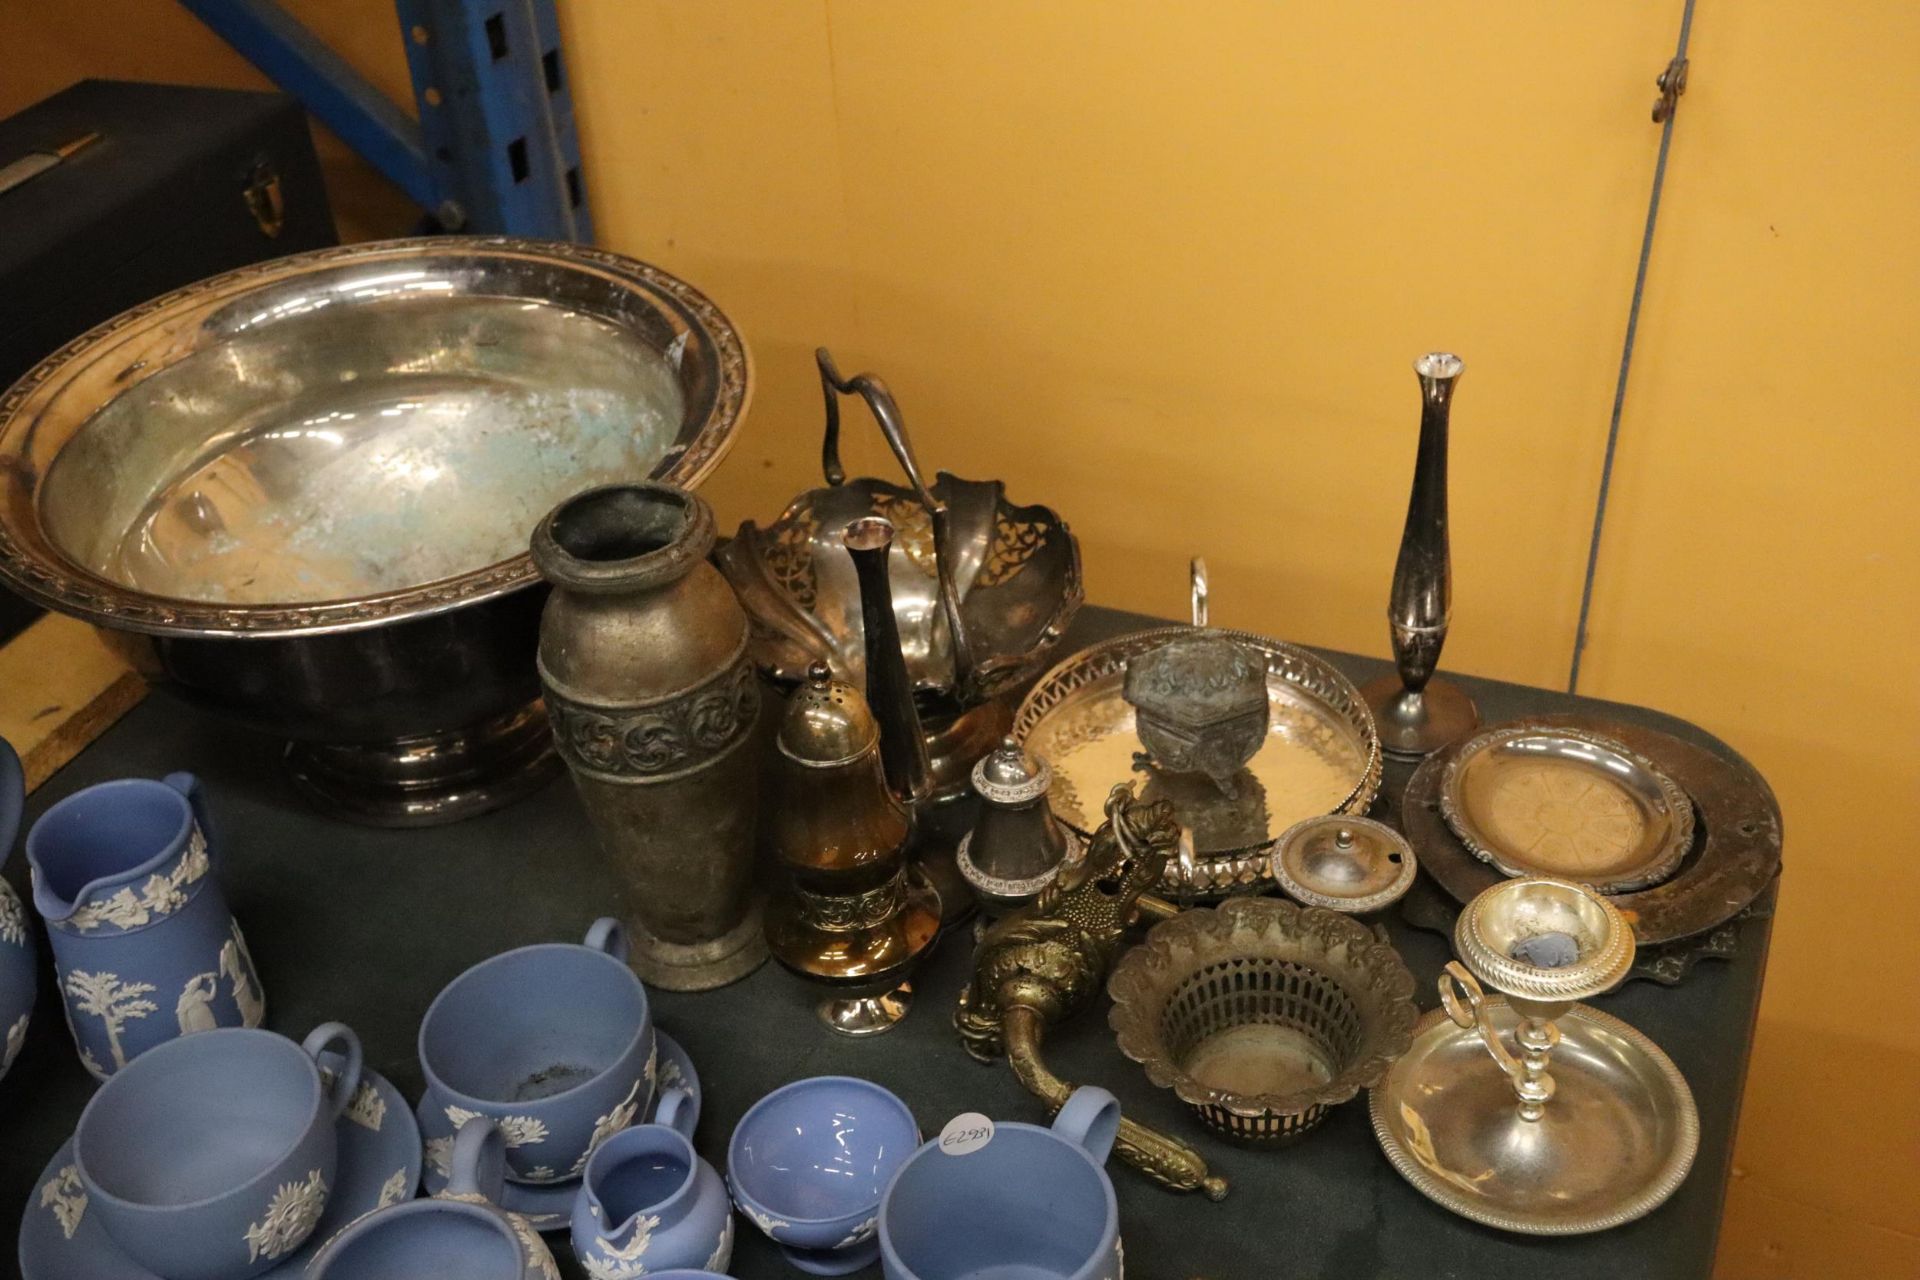 A QUANTITY OF SILVER PLATED ITEMS TO INCLUDE A LARGE BOWL, CANDLESTICK, TRAY, PLATES, SUGAR